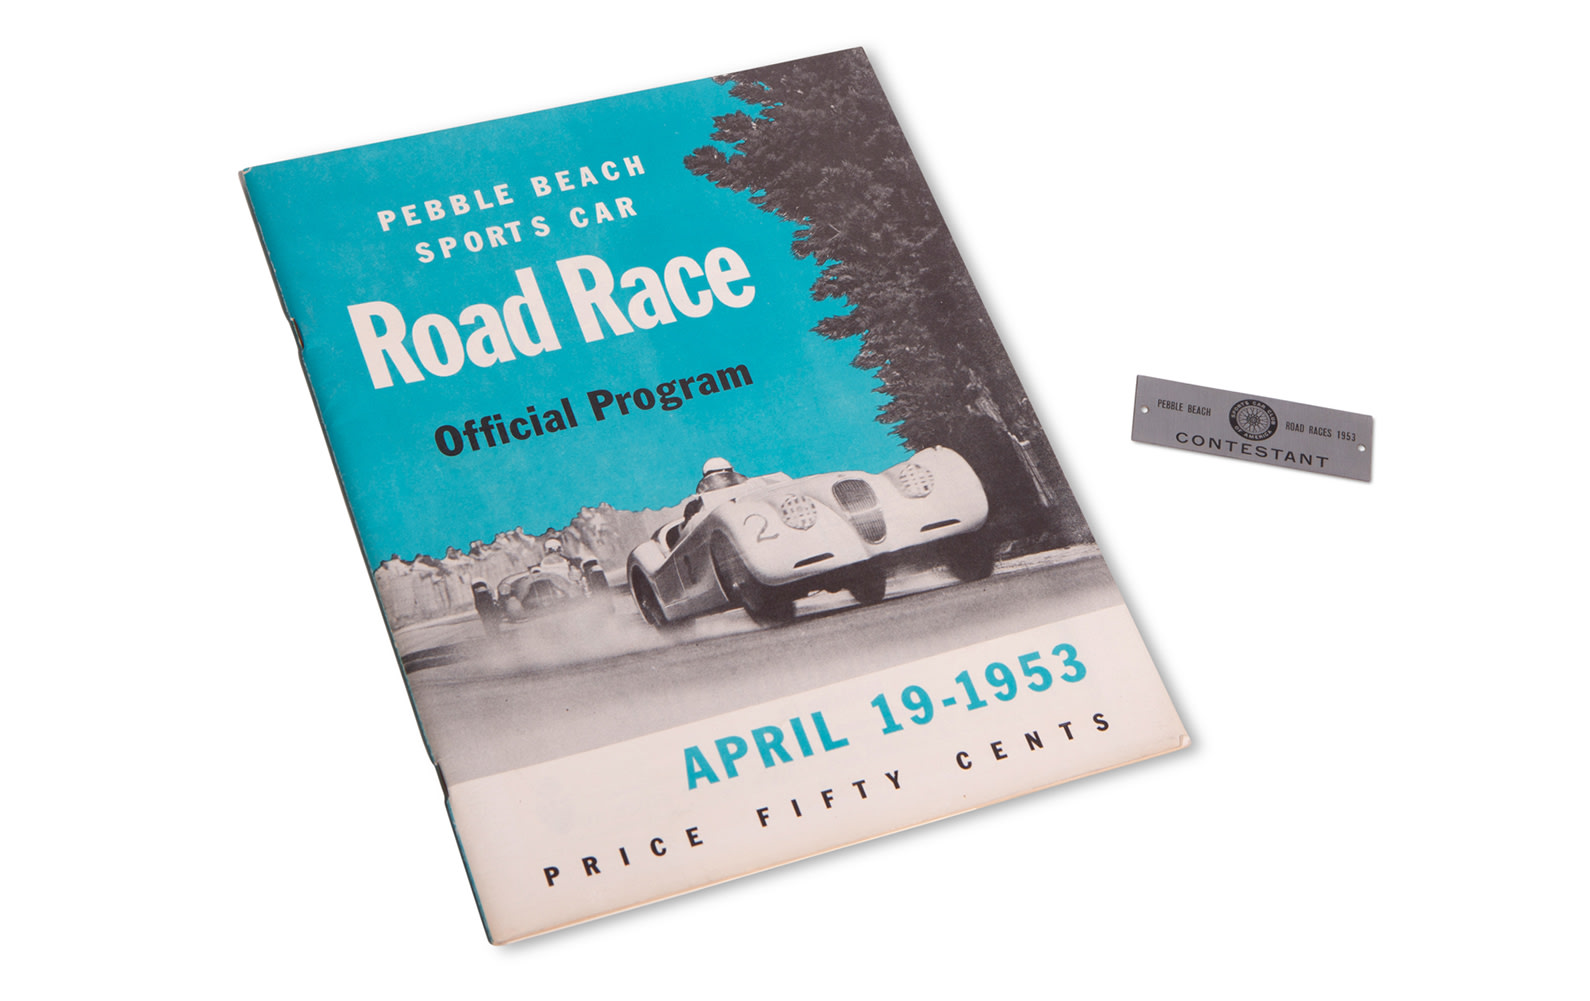 1953 Pebble Beach Road Race Official Program and Contestant Badge